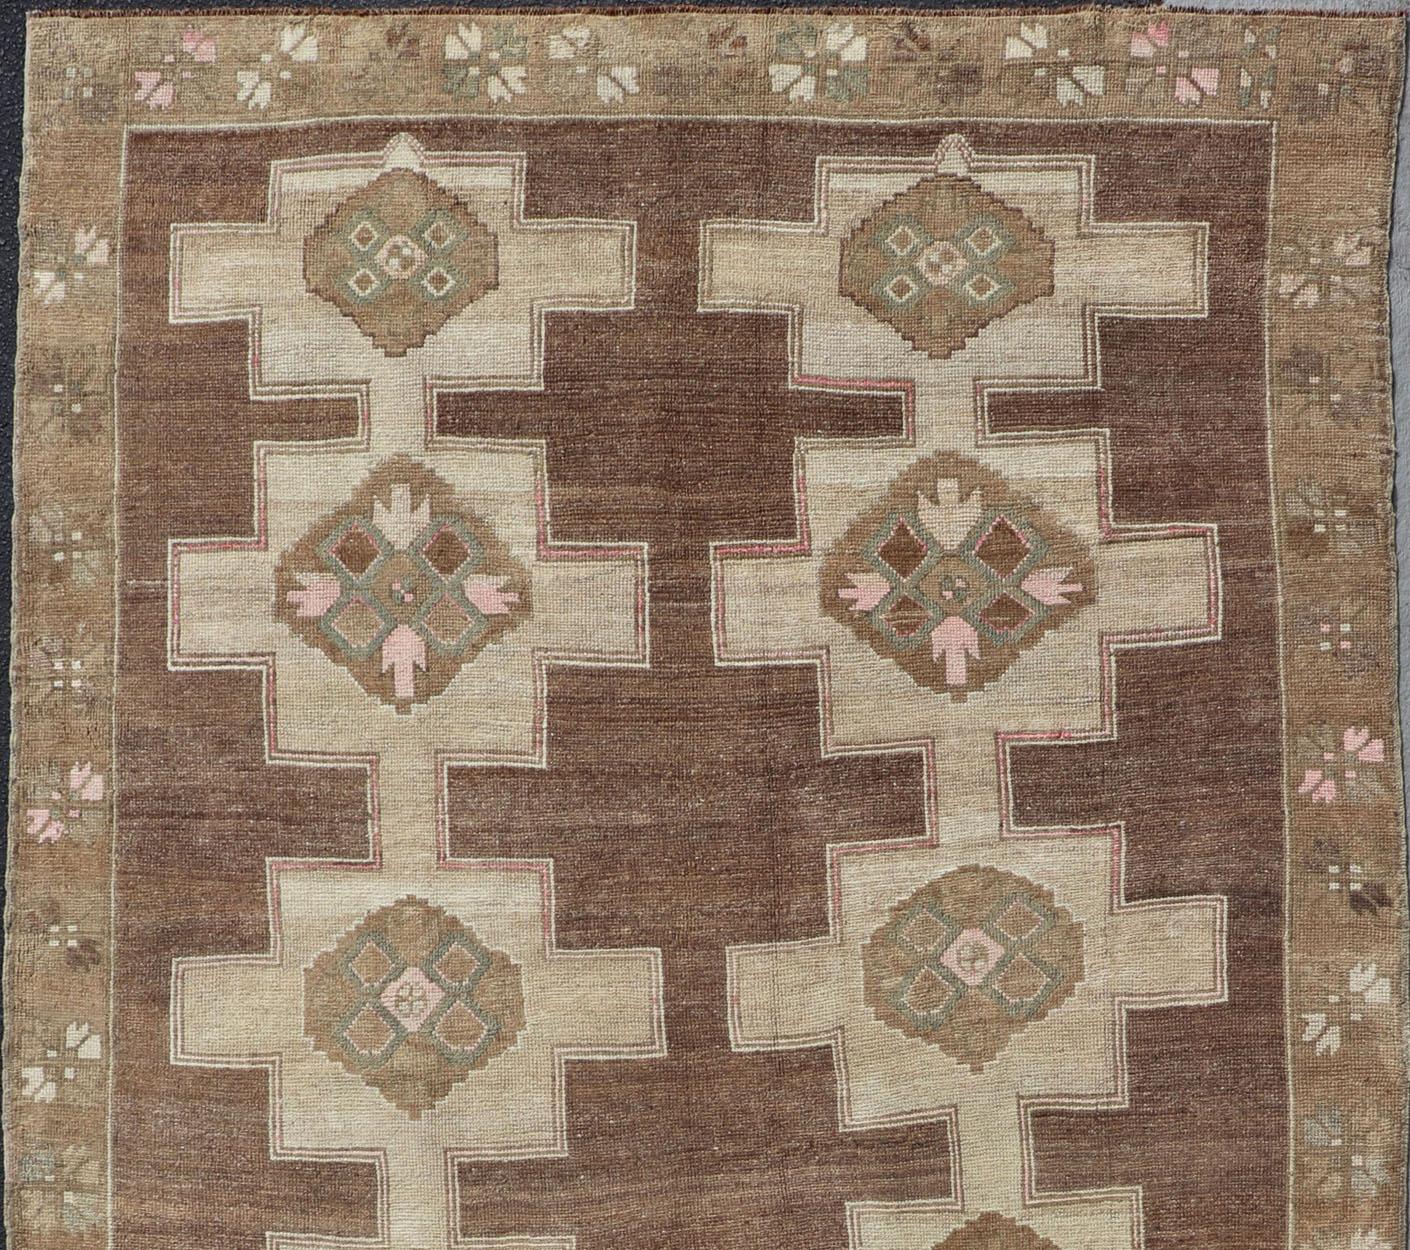 Stacked in two rows of geometric medallions, this Vintage Turkish Kars wide gallery runner displays great geometry in chocolate Brown background with Colors such as Tan, Taupe and Light Green. Keivan Woven Arts rug / EN-179569 type / Turkish Kars